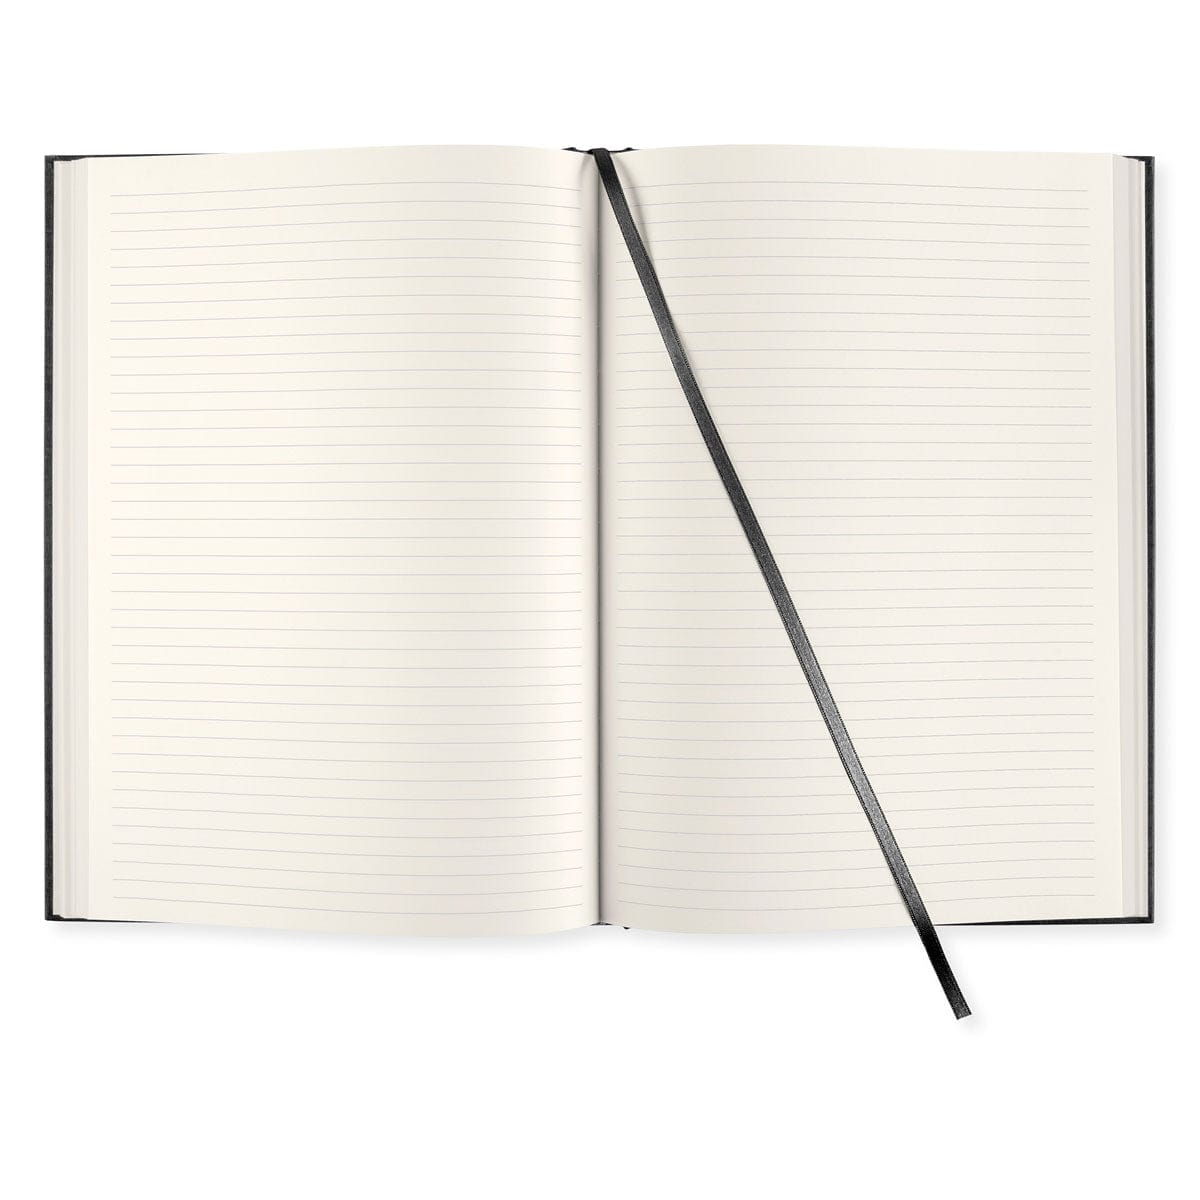 PaperStyle Paperstyle NOTEBOOK A5 256p. Ruled Transparent Black